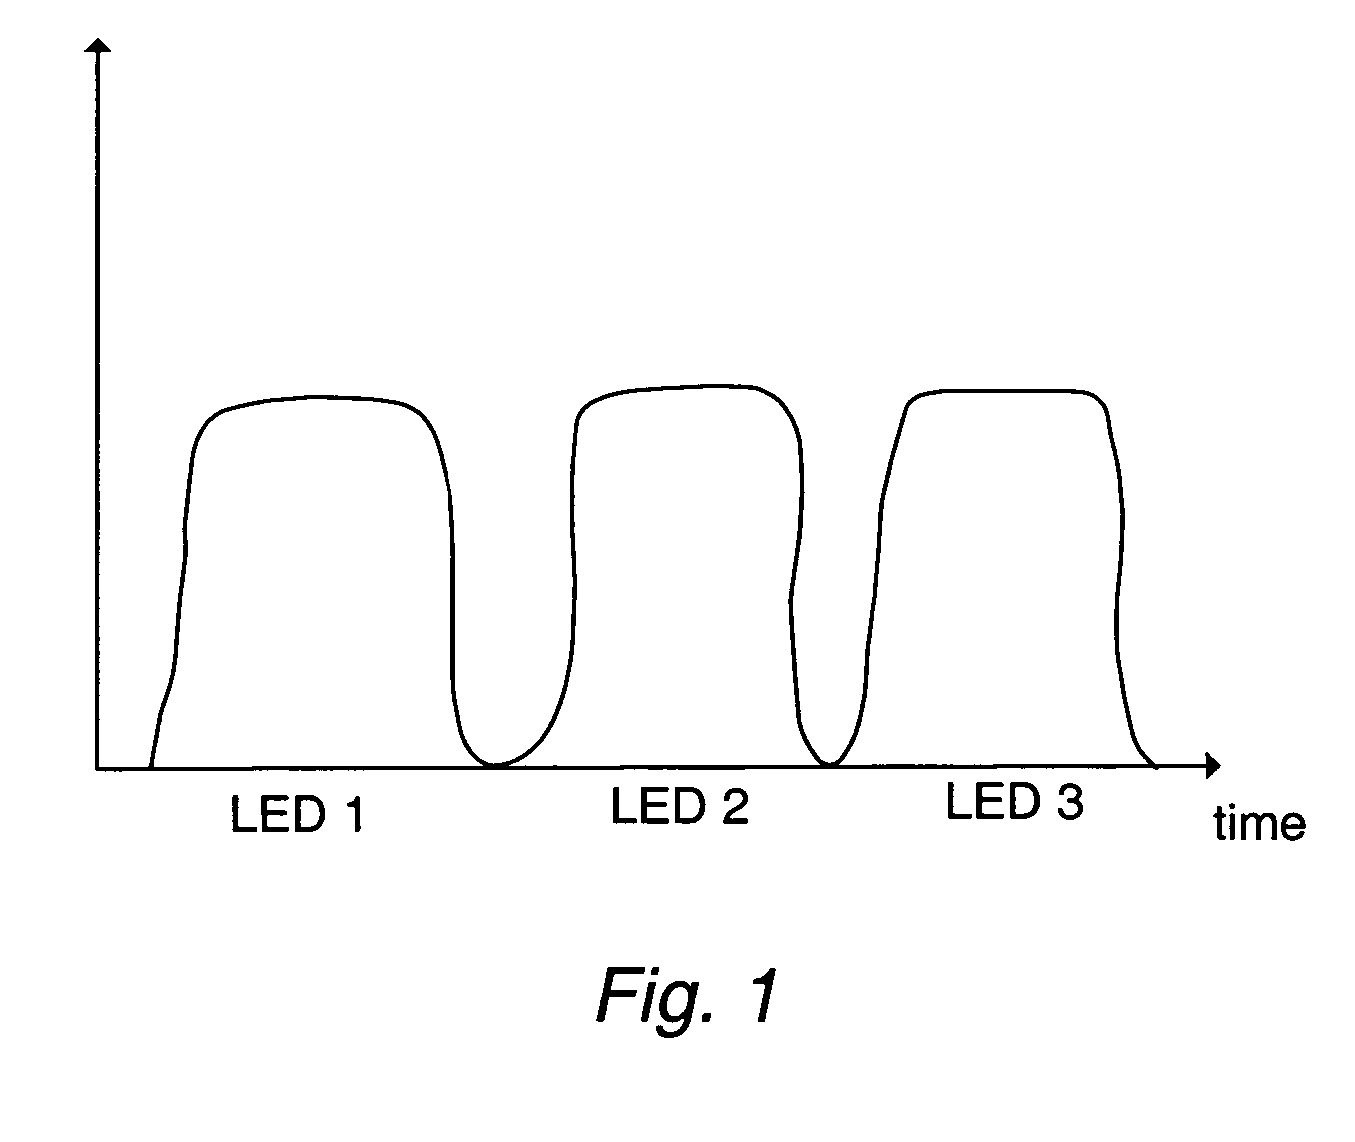 Light emitting diode based measurement systems